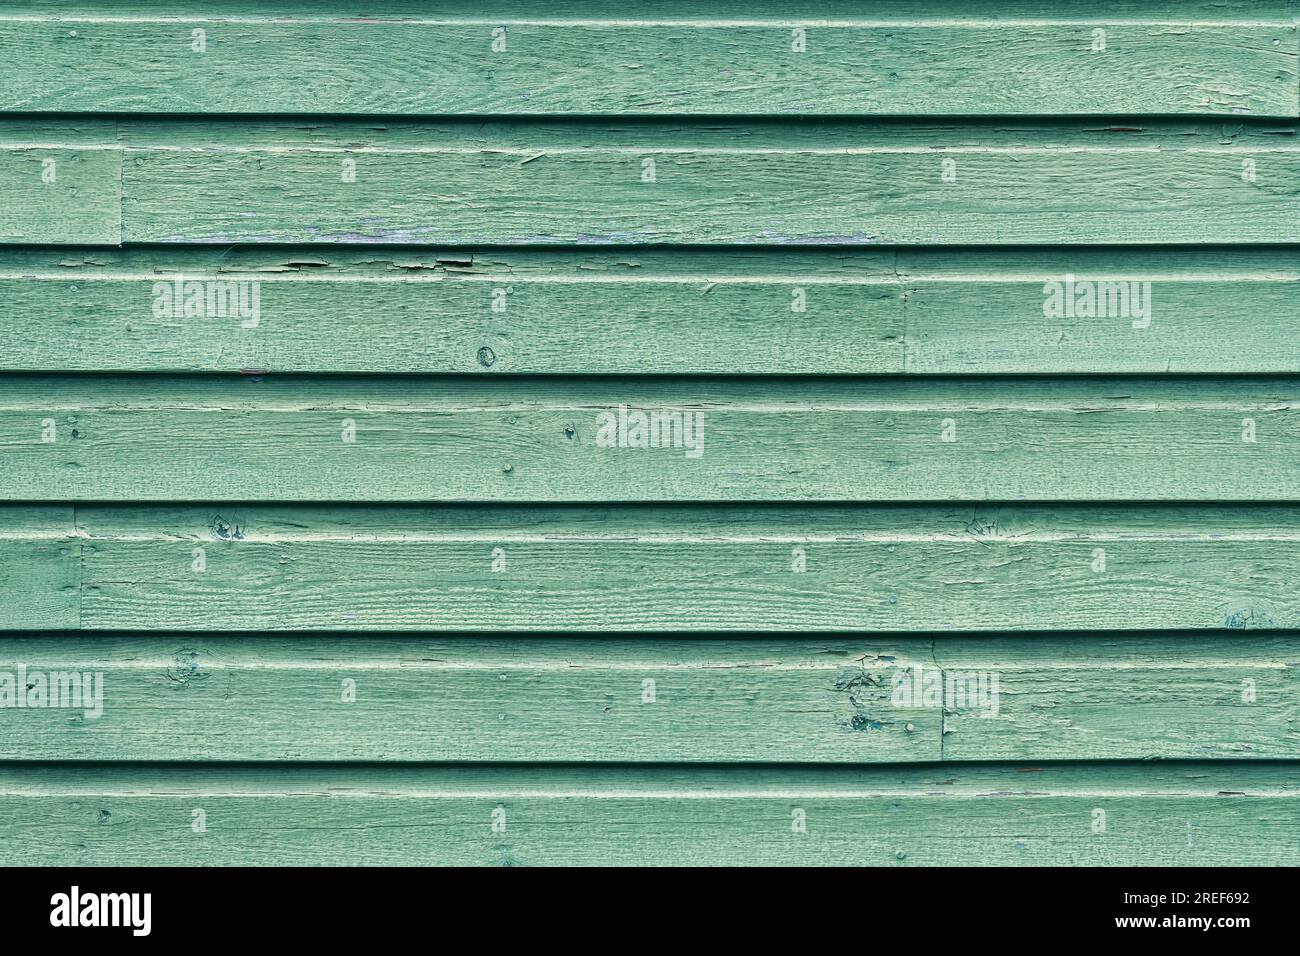 Green housing wooden wall detail of wood panelling, Telegraph Cove, Vancouver Island, British Columbia, Canada. Stock Photo